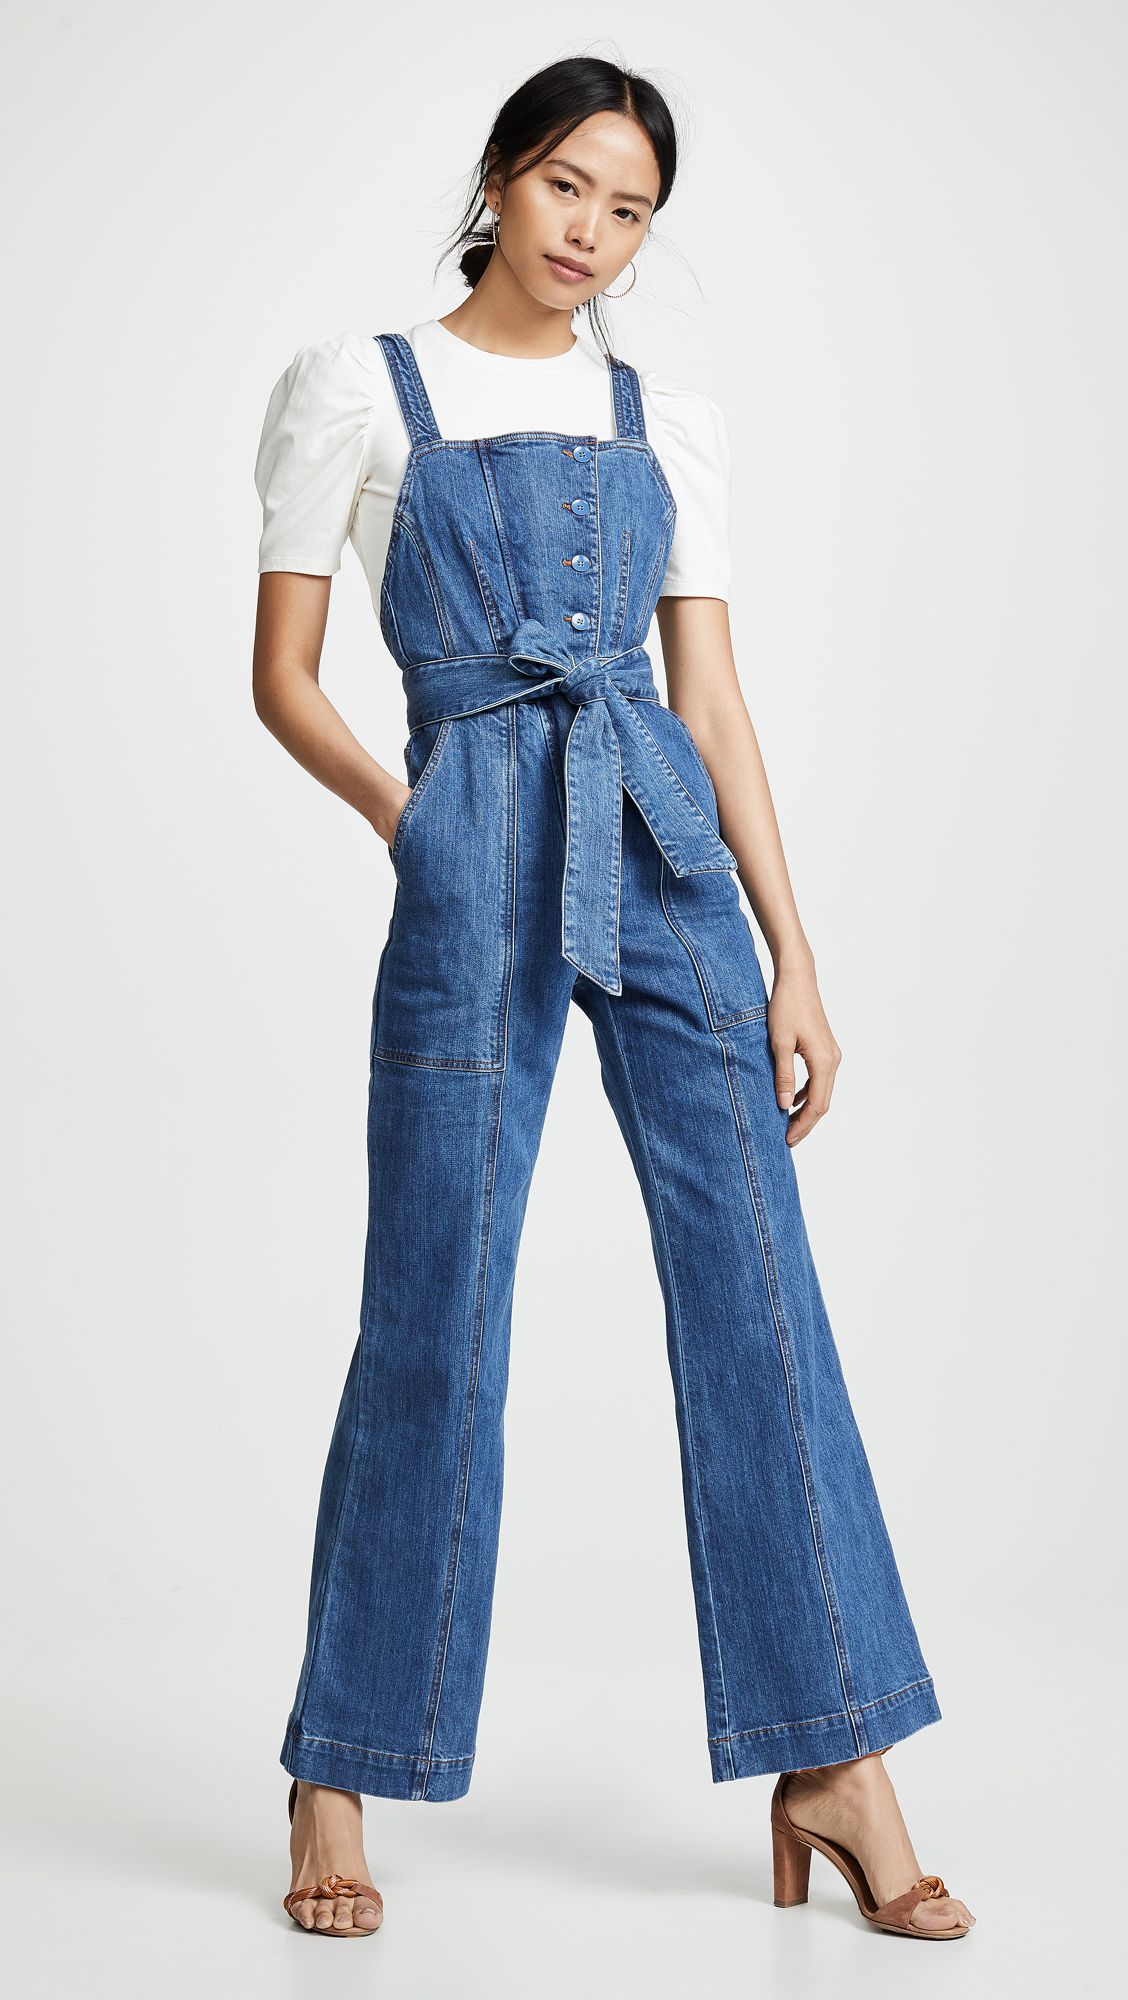 Katie Holmes' Denim Overalls From Ulla Johnson Are Perfect for Summer ...